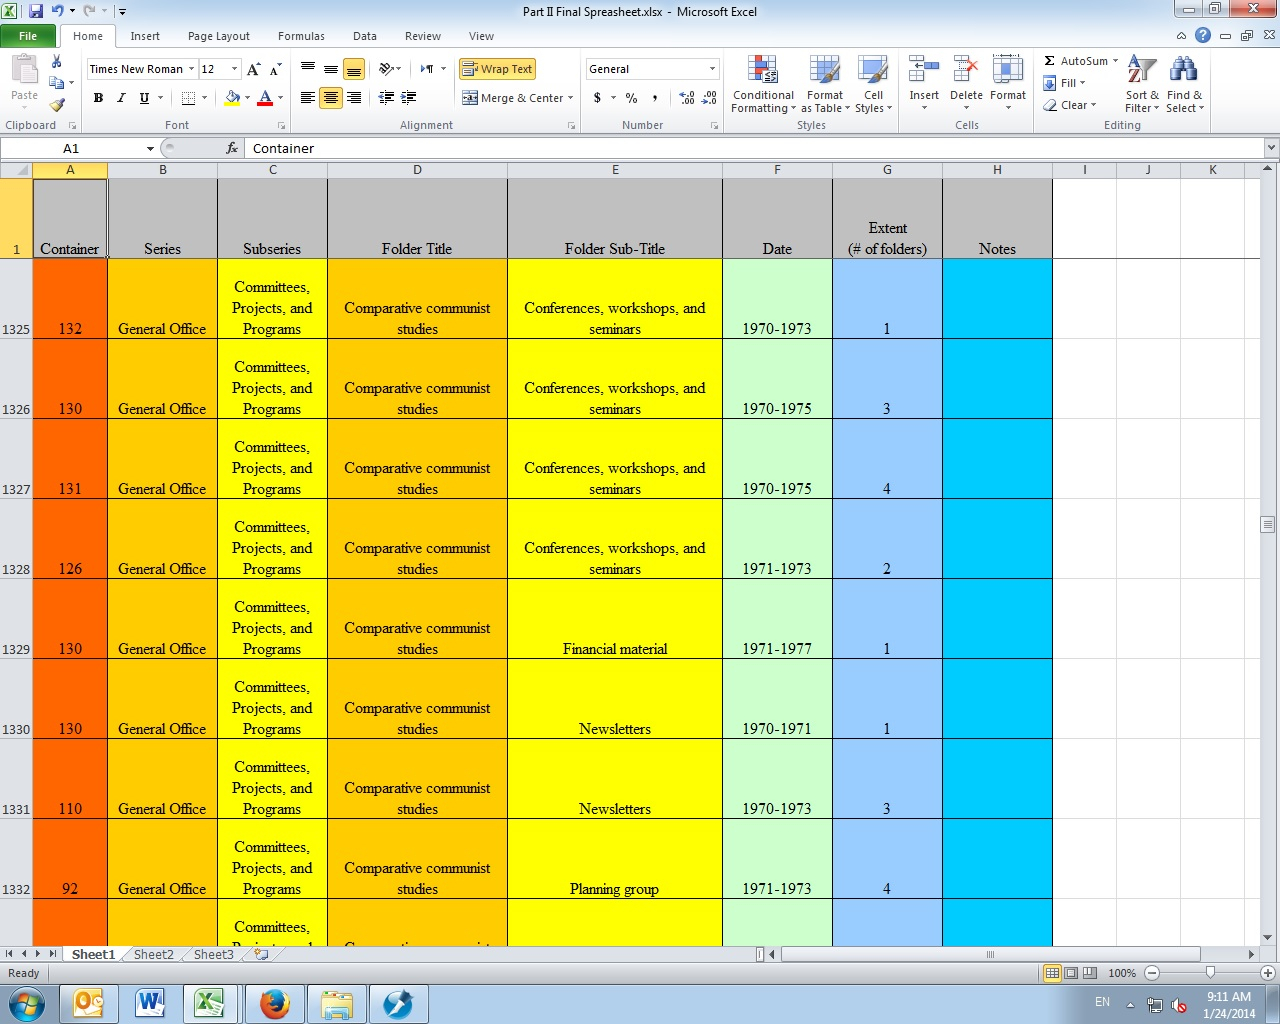 Wordperfect Spreadsheet Pertaining To Converting Spreadsheets To Word Documents: A Walkthrough